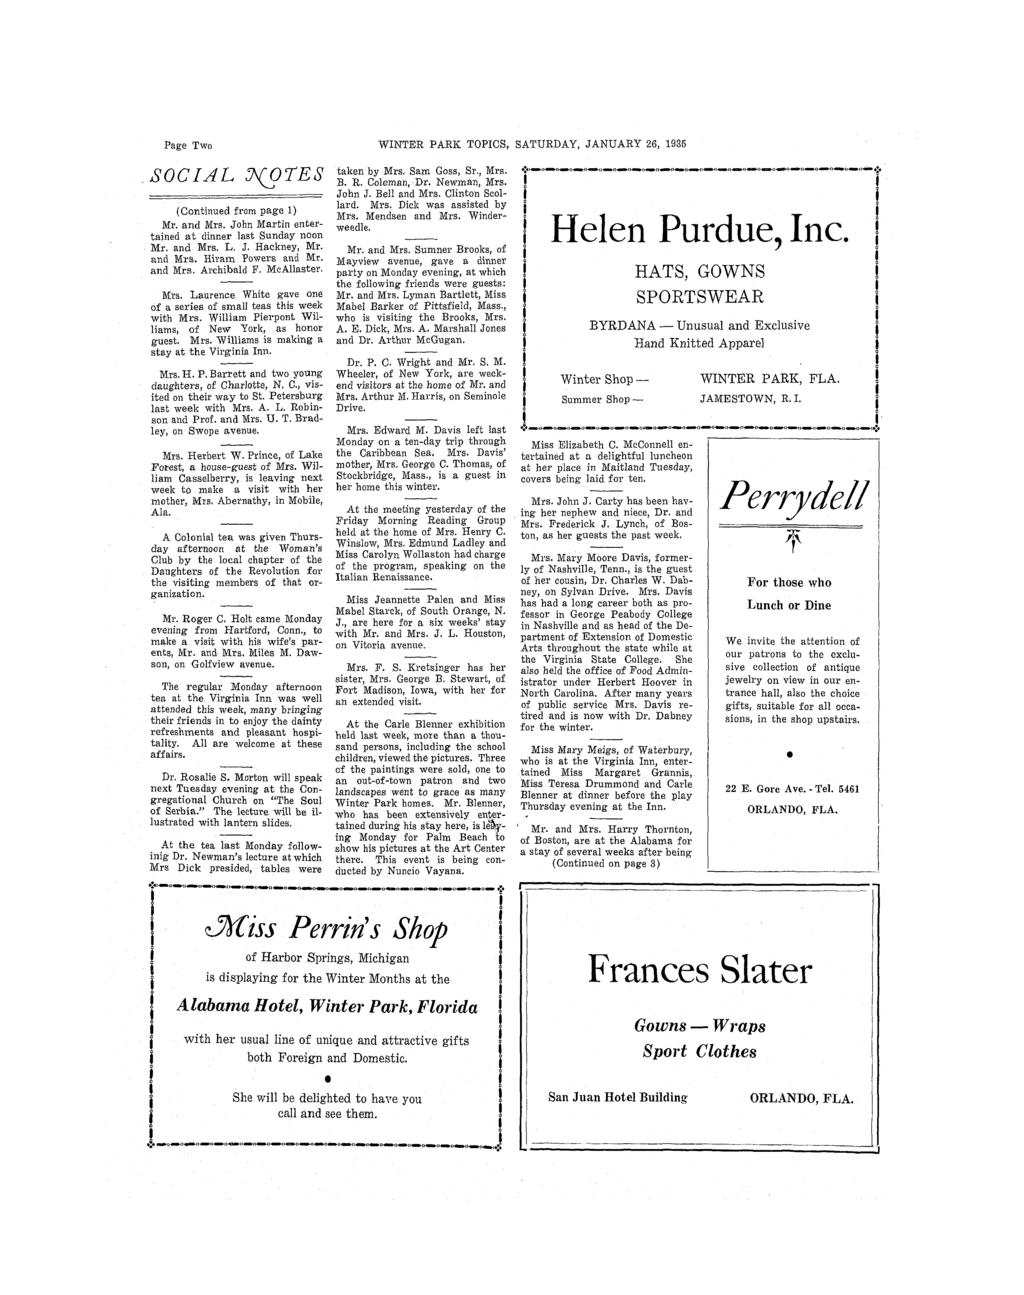 Page Two WNTER PARK TOPCS, SATURDAY, JANUARY 26, 1935 SOCAL (Contnued from page 1) Mr. and Mrs. John Martn entertaned at dnner last Sunday noon Mr, and Mrs. L. J. Hackney, Mr. and Mrs. Hram Powers and Mr.